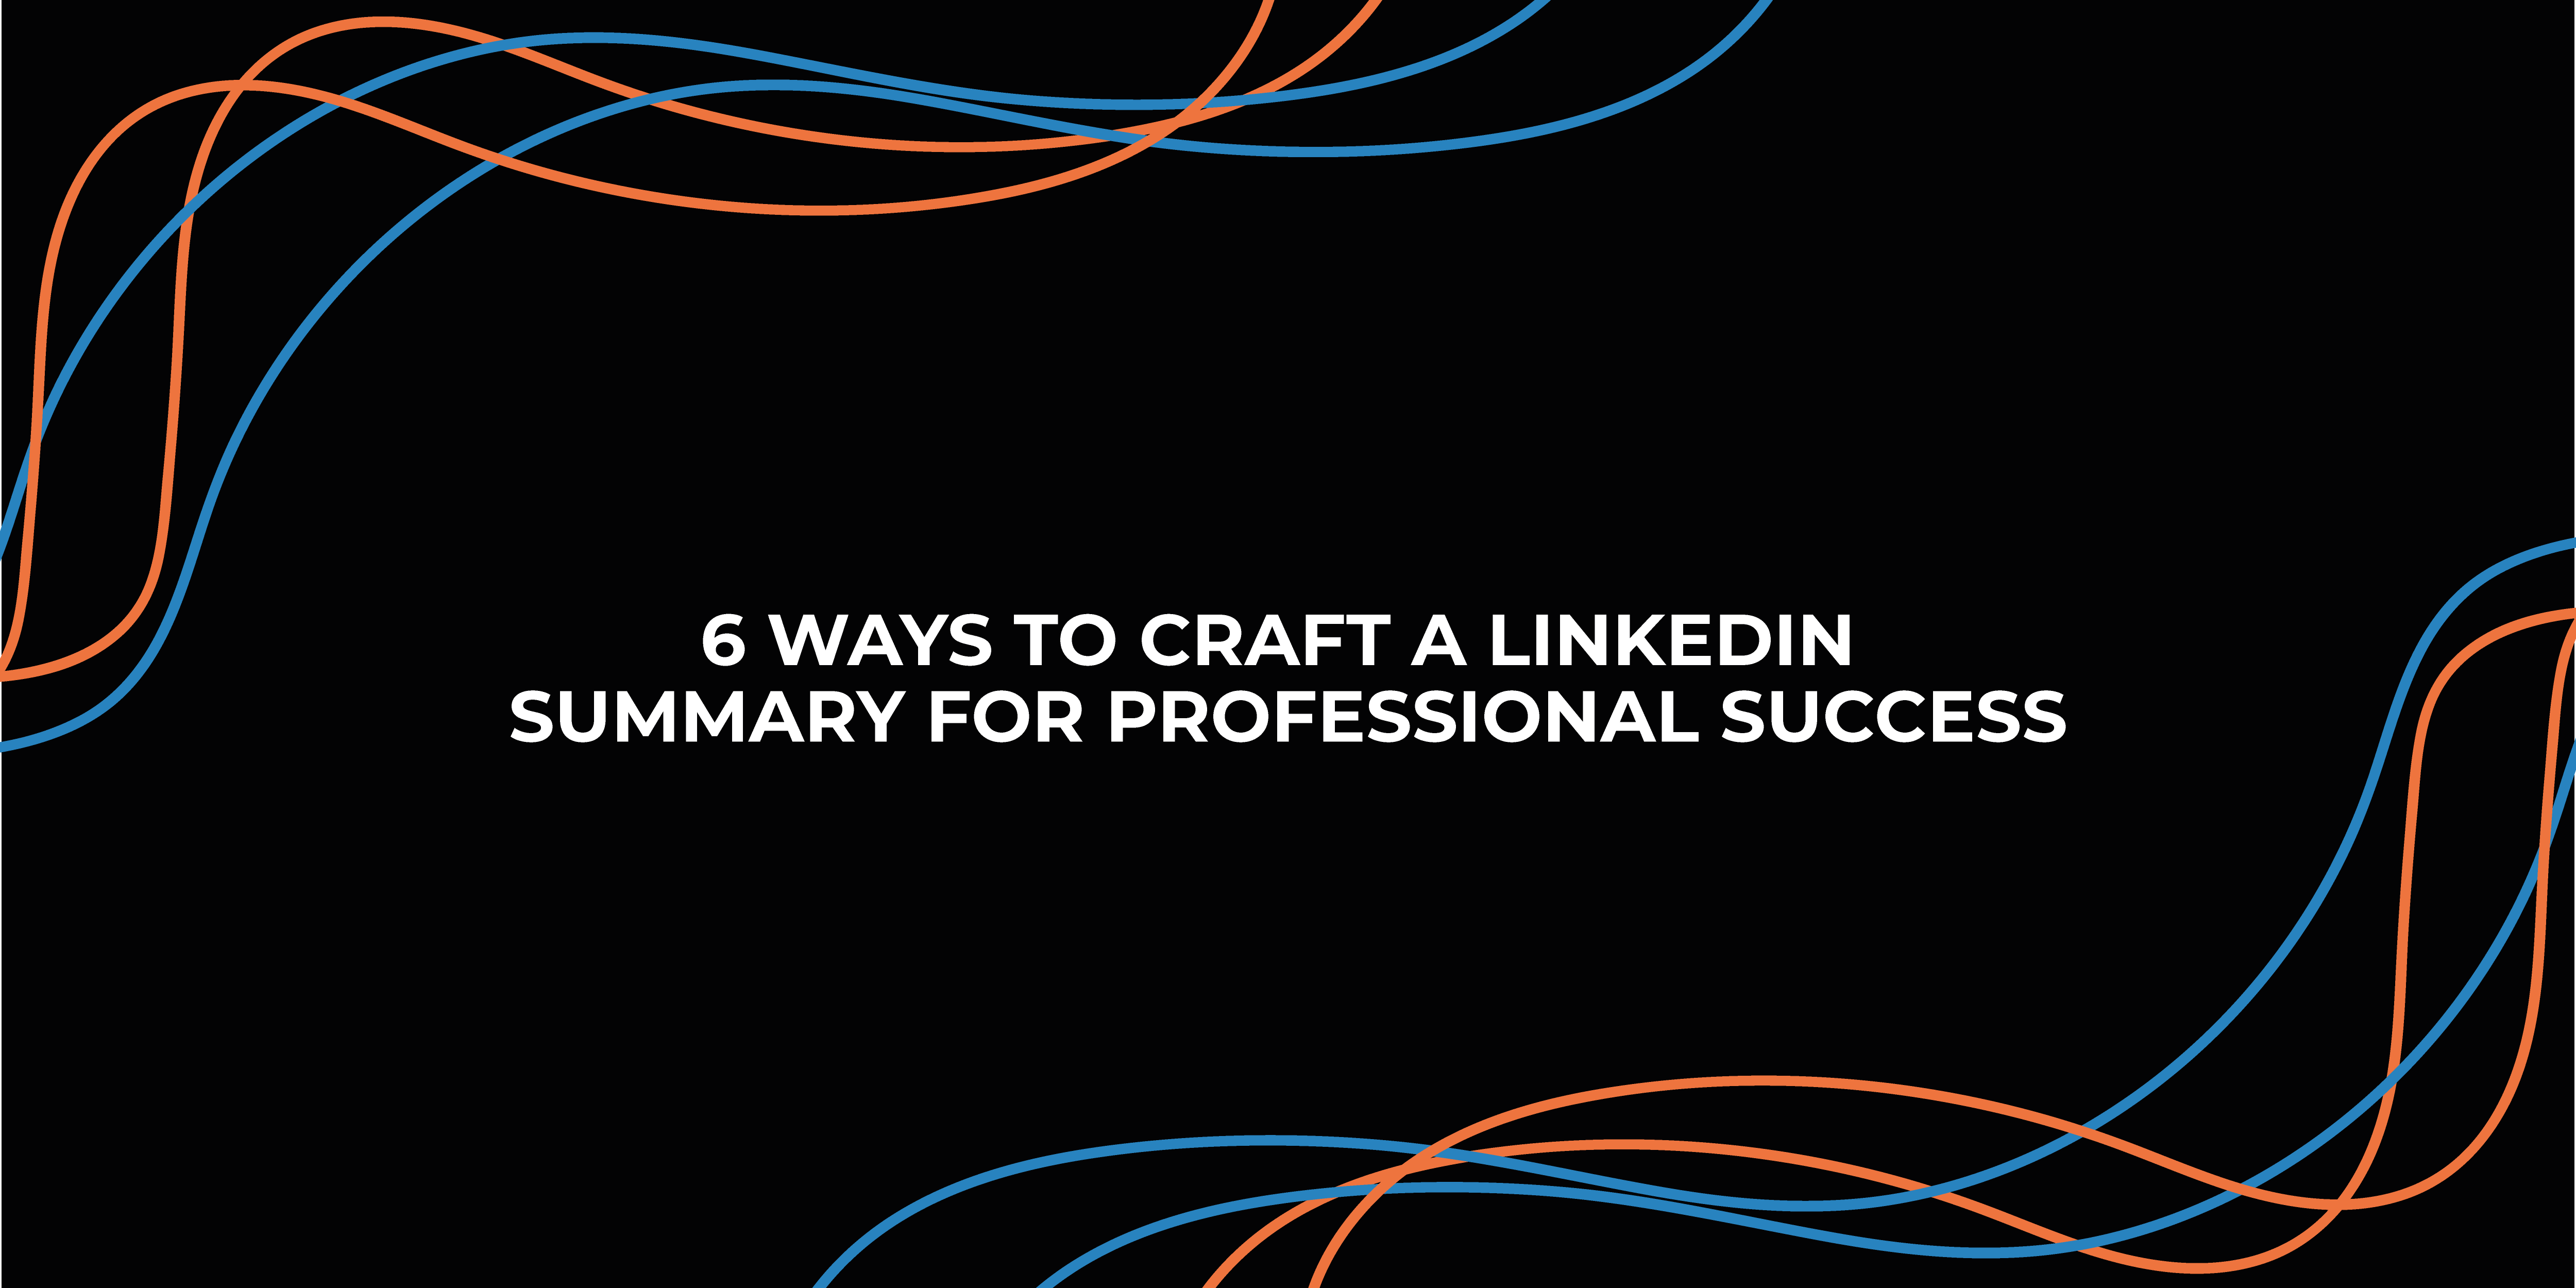 6 Ways to Craft a LinkedIn Summary for Professional Success